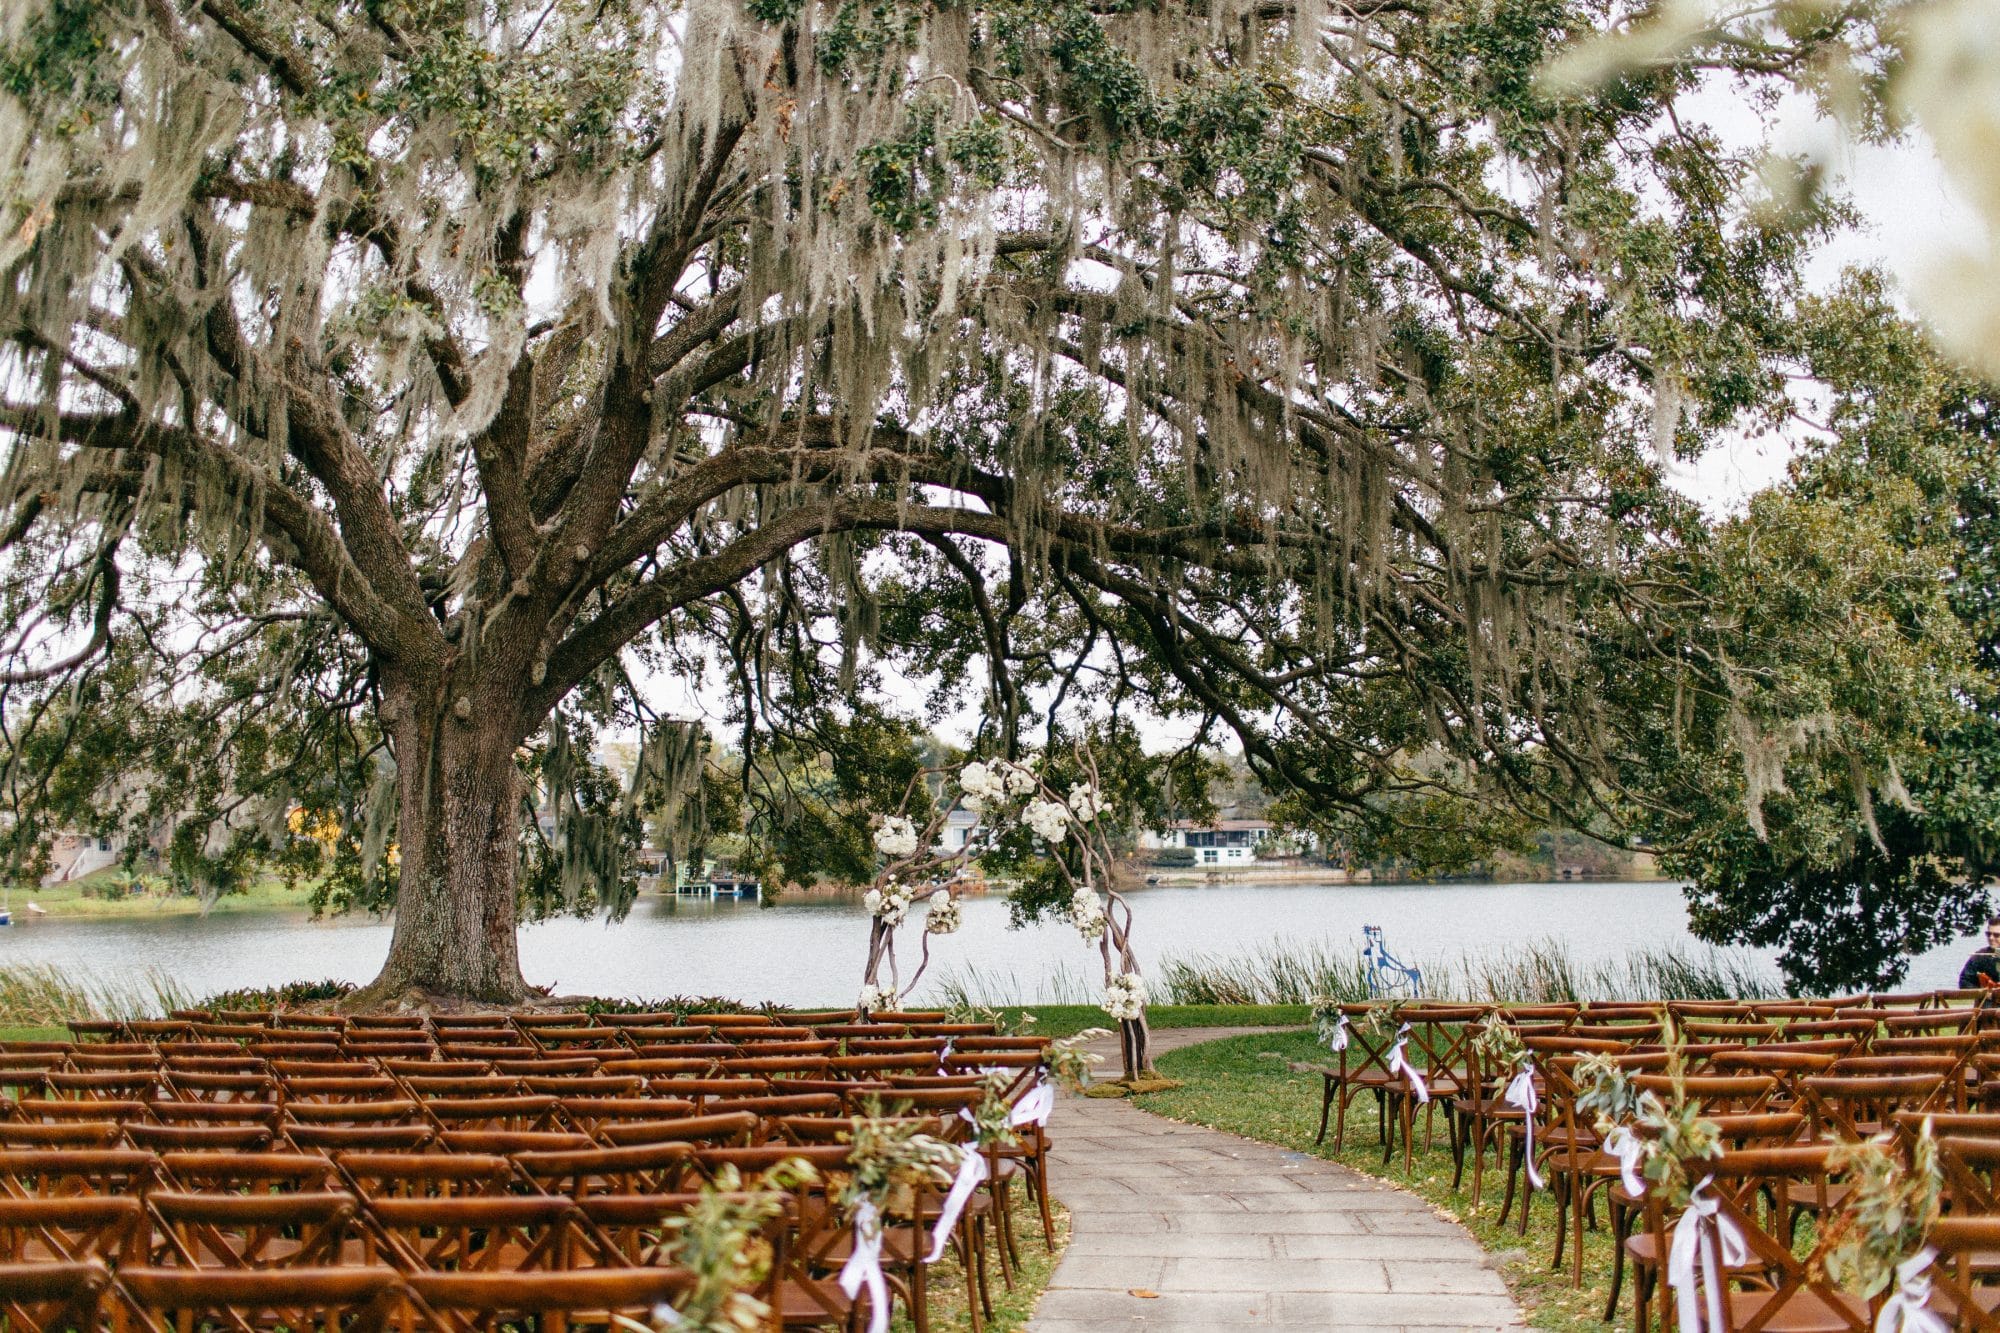 Mennello Museum of American Art - waterfront ceremony with rustic chairs under large oak tree